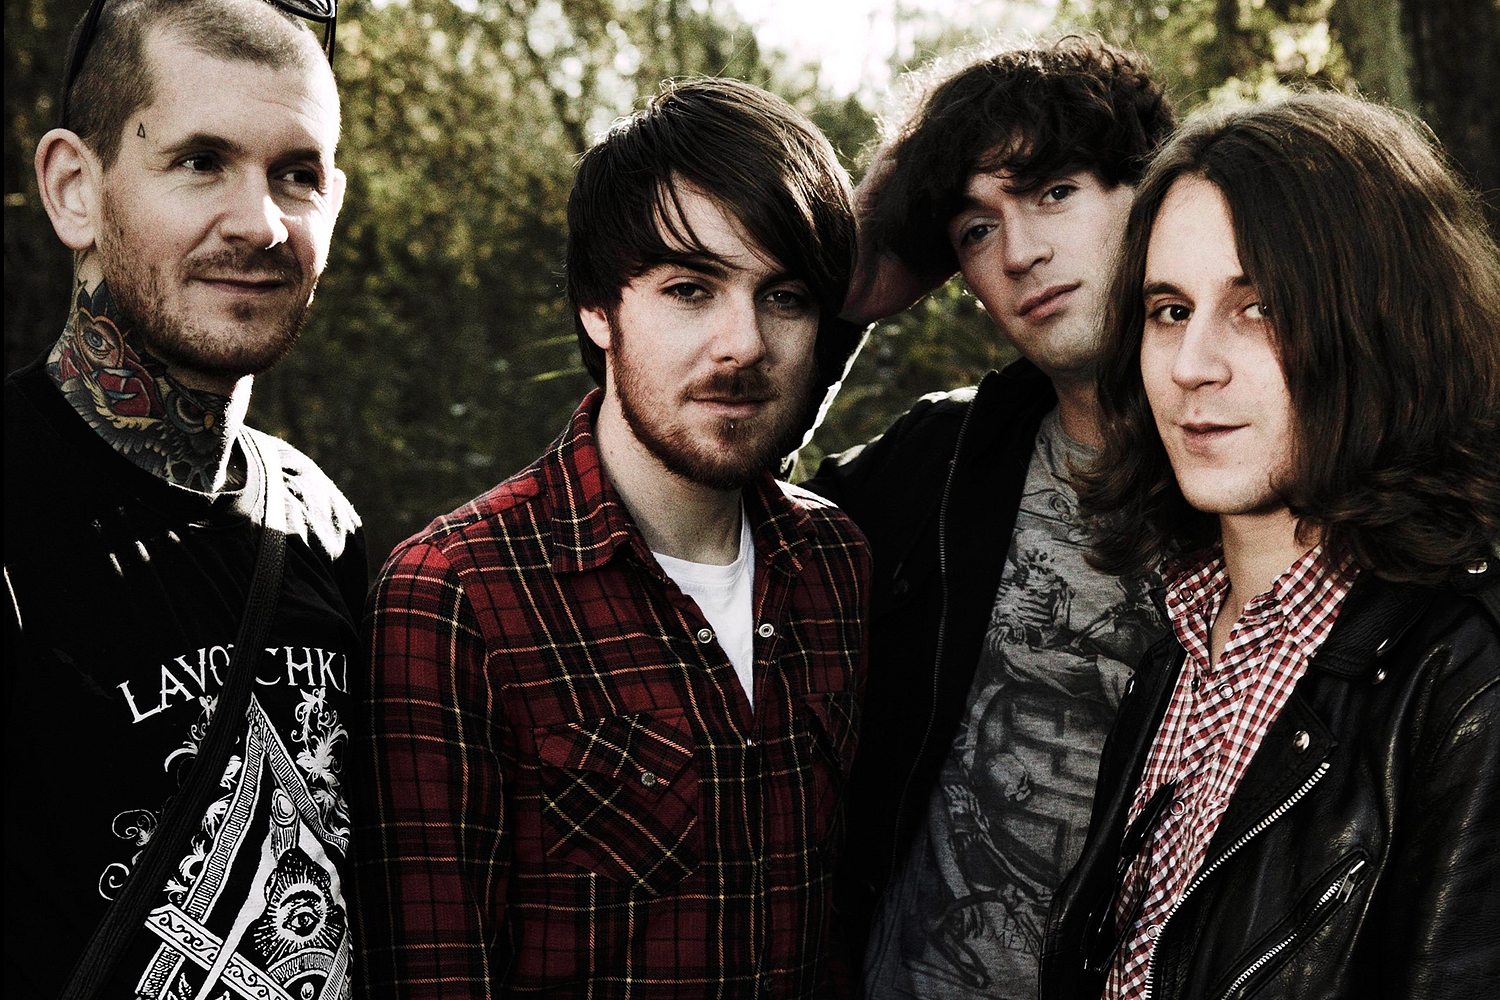 Headliners announced for Southsea 2014: Pulled Apart By Horses & more